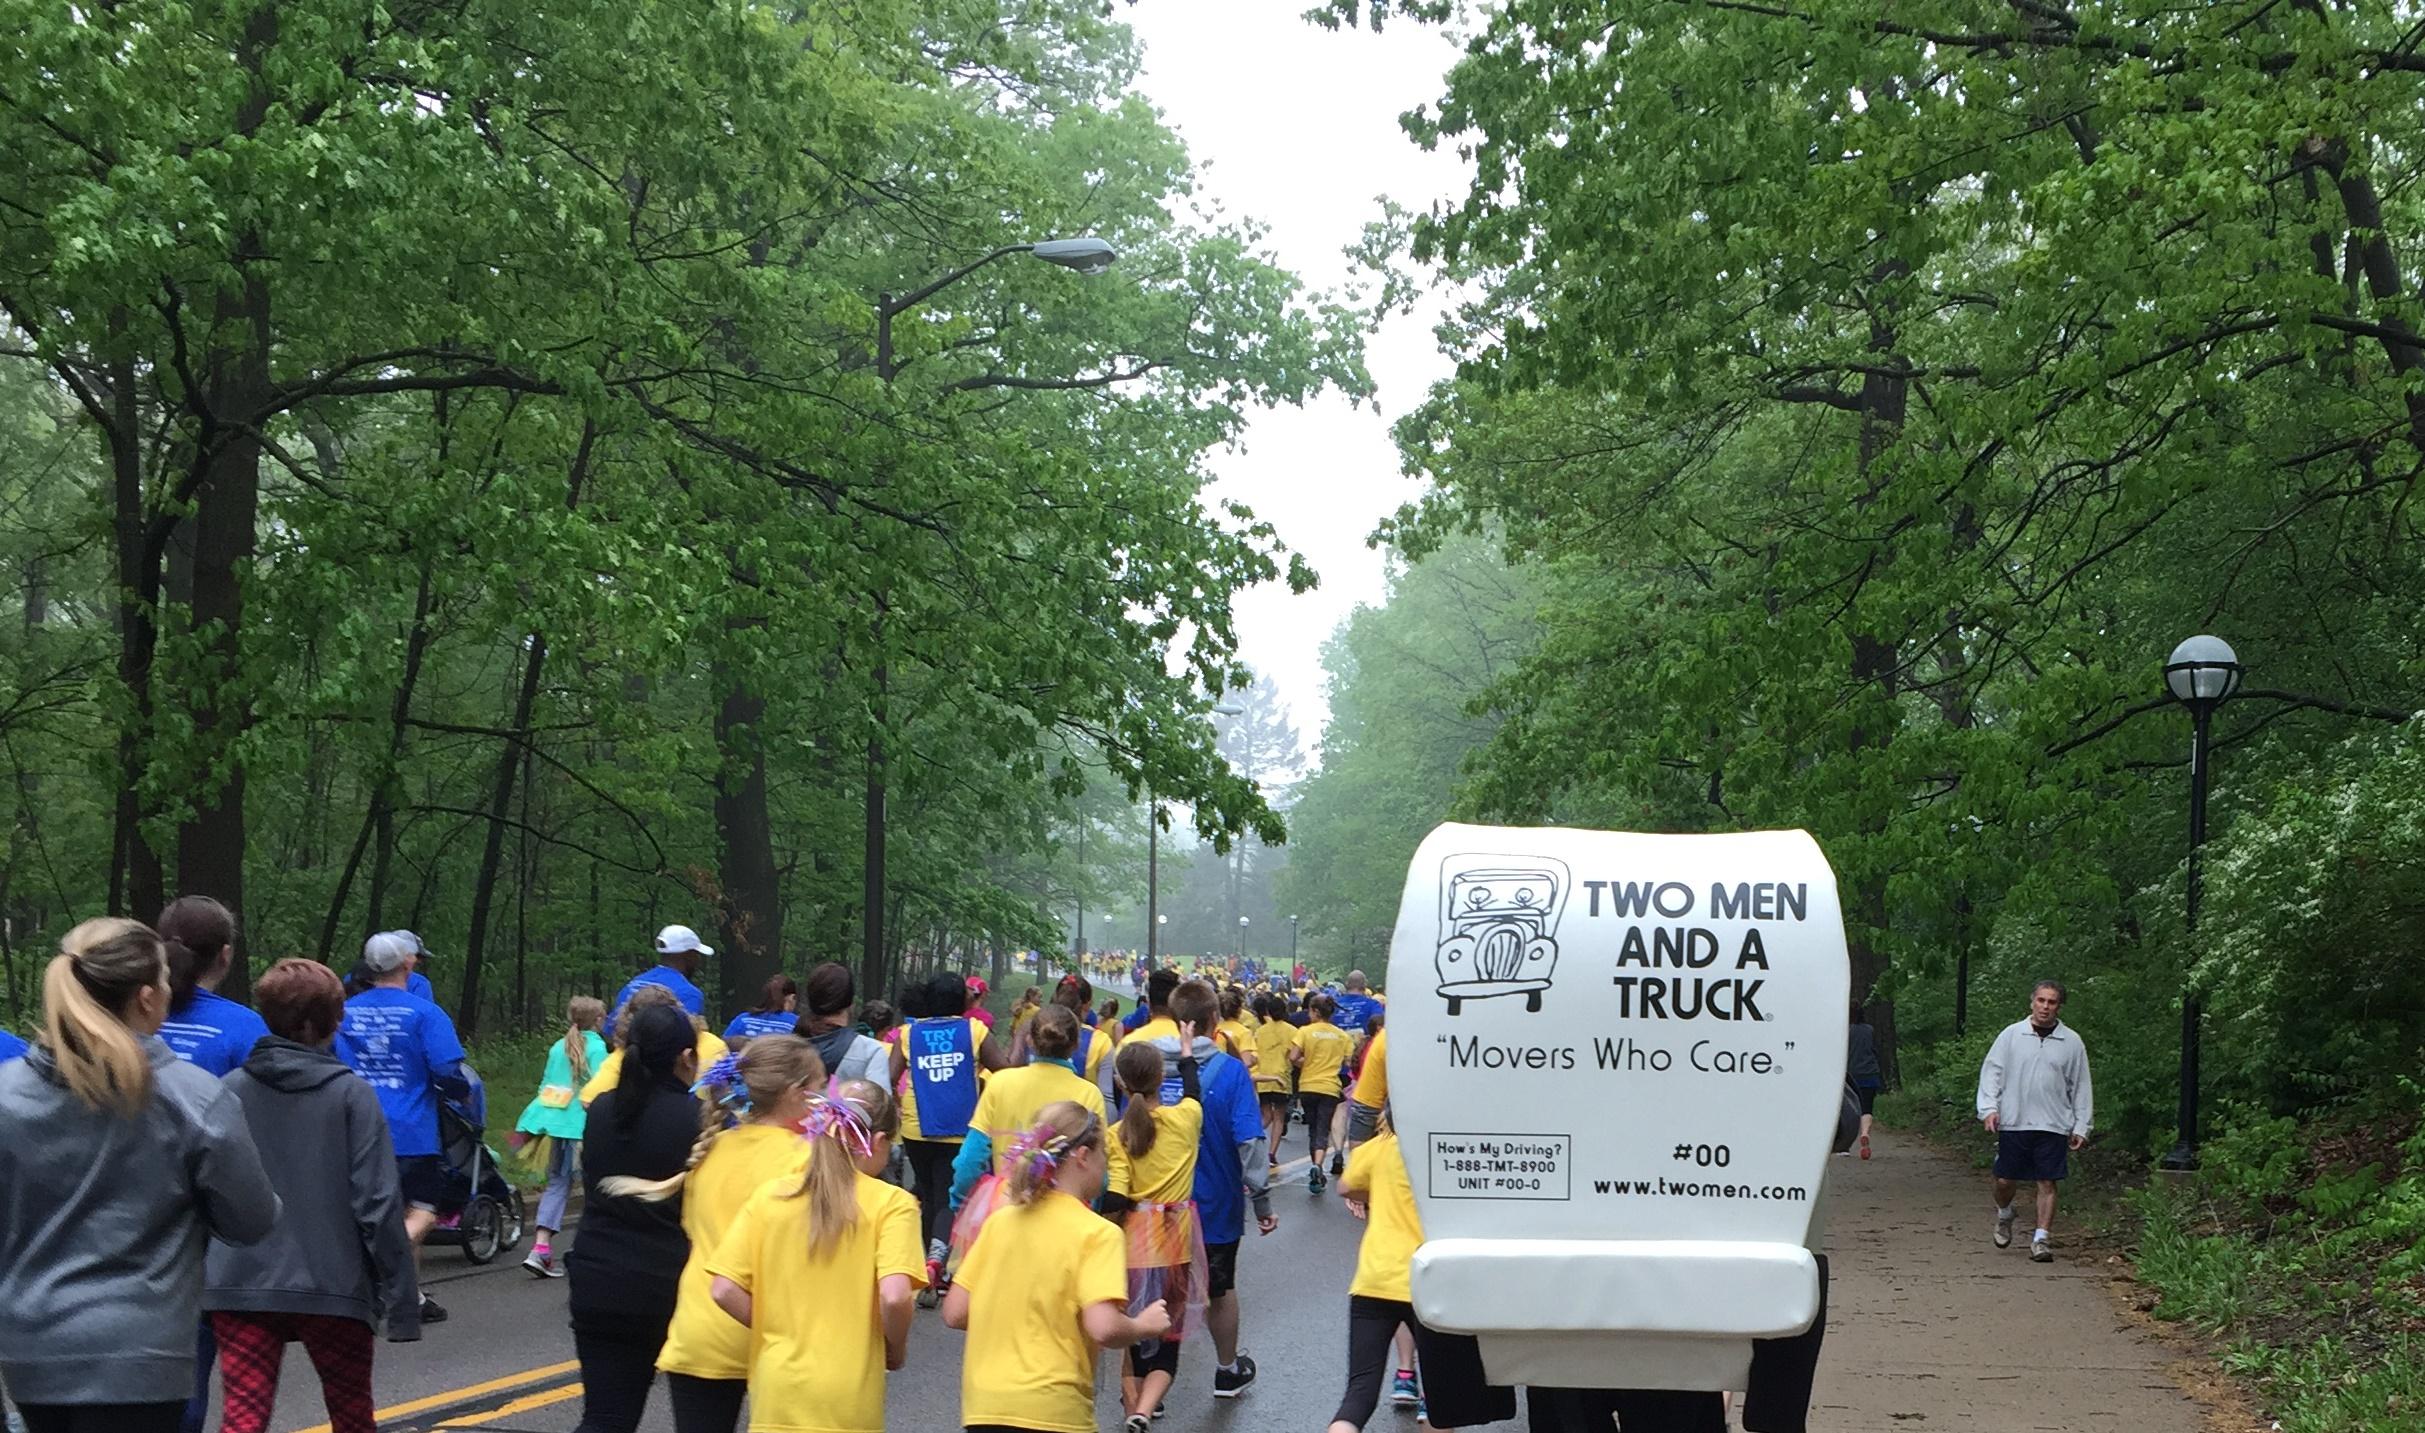 Truckie mascot is running alongside the participants of the Girls on the Run 5K